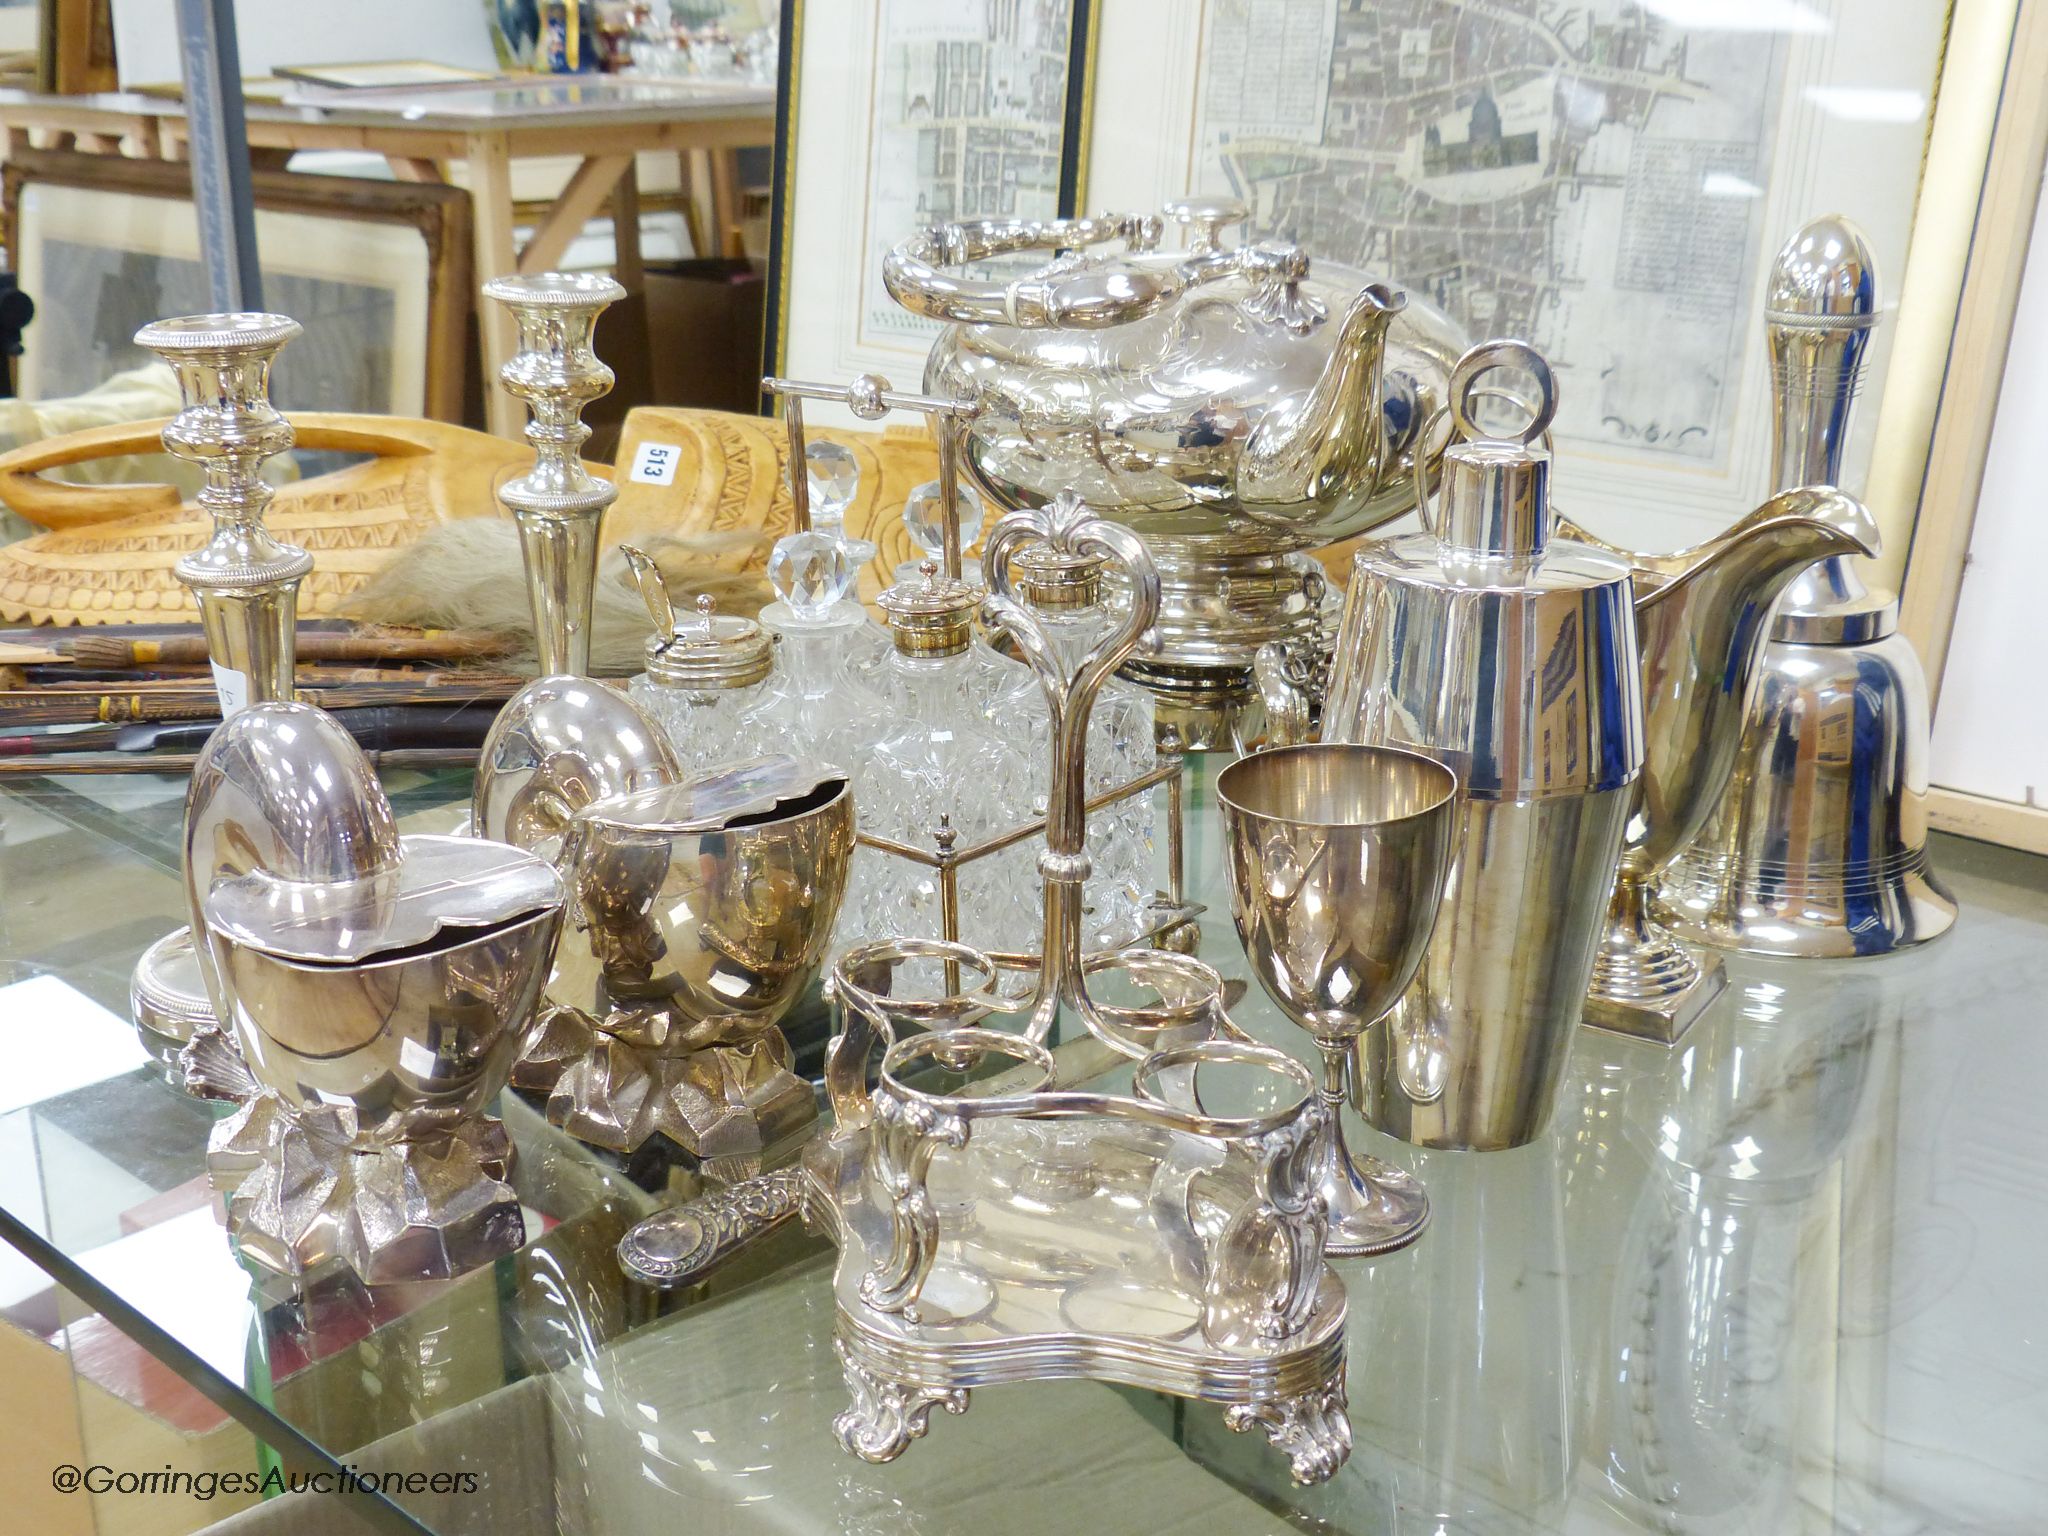 A quantity of various plated wares